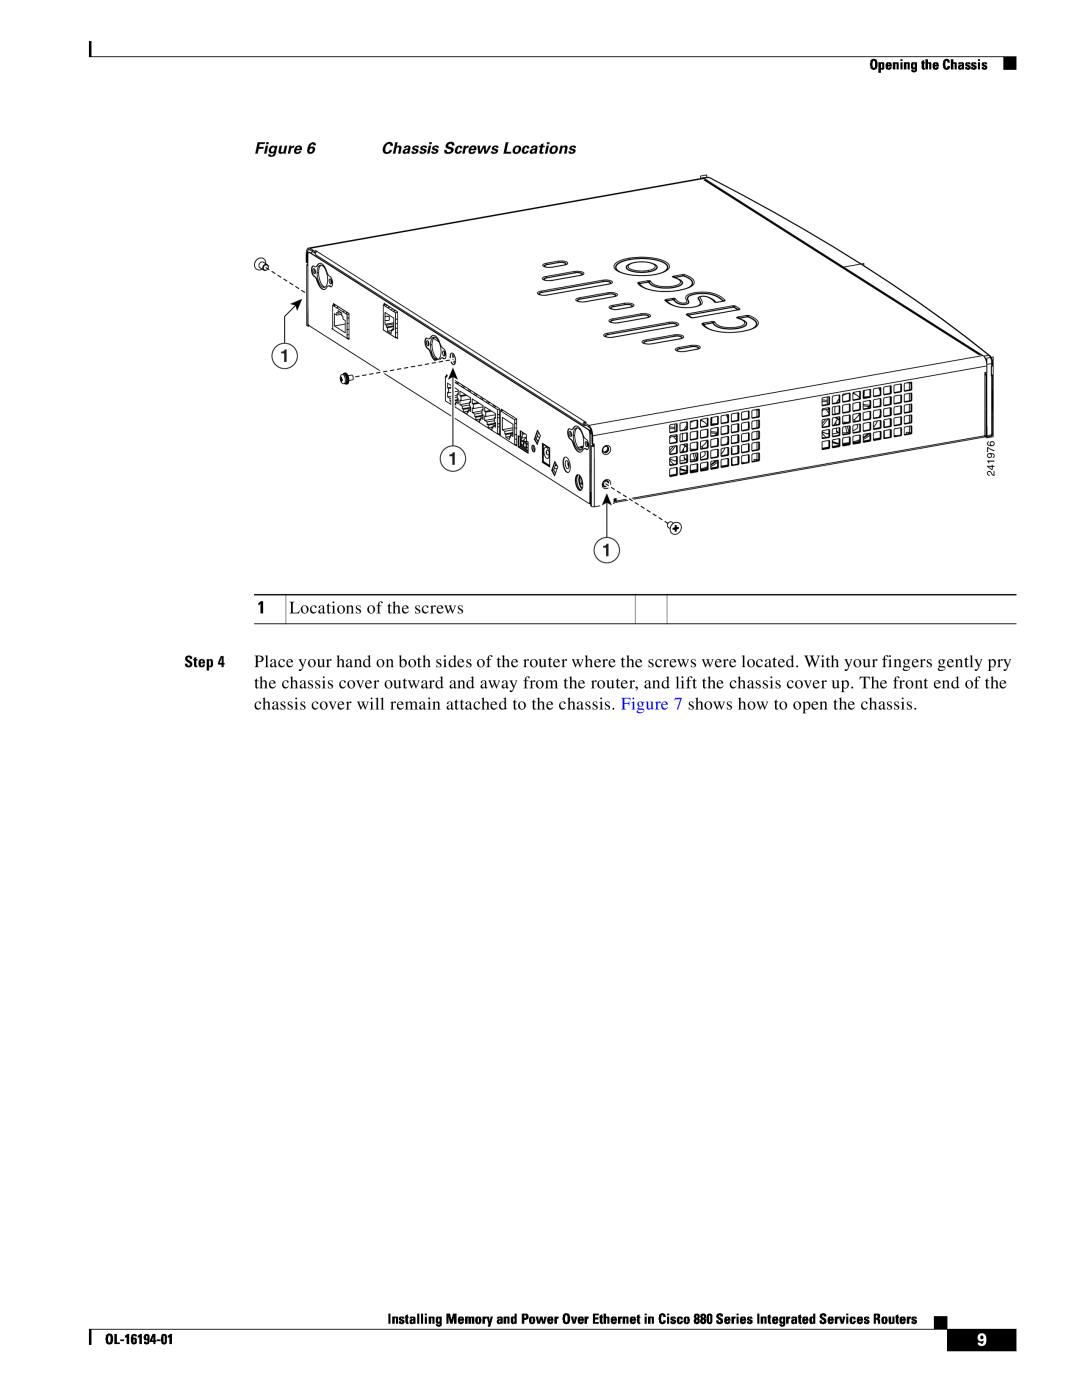 Cisco Systems 880 Series manual Locations of the screws 